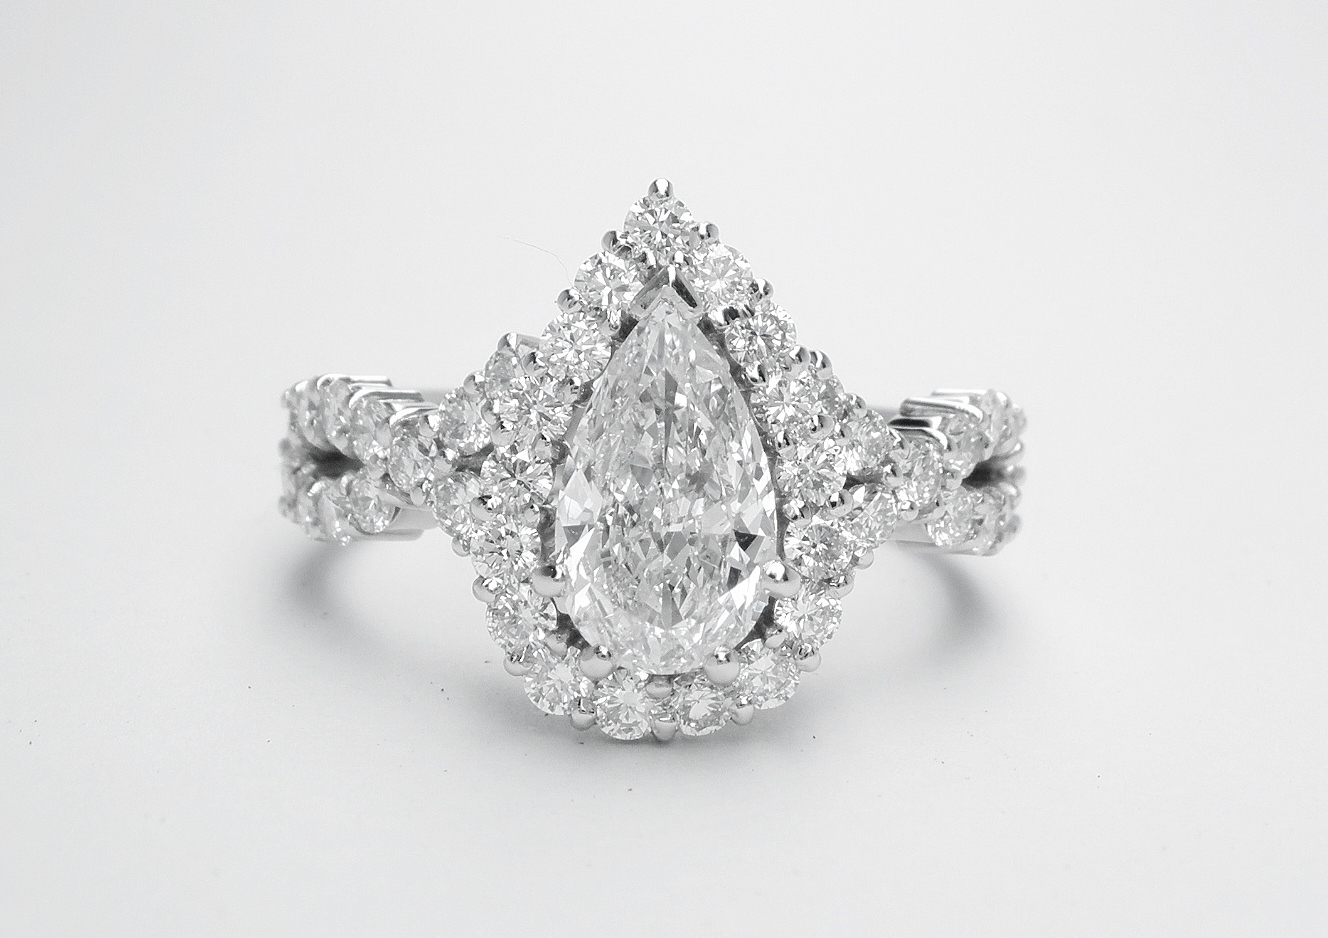 Pear shaped halo cluster ring with centre 0.70ct. 'D'colour pear diamond & criss-cross diamond shoulders set in platinum.